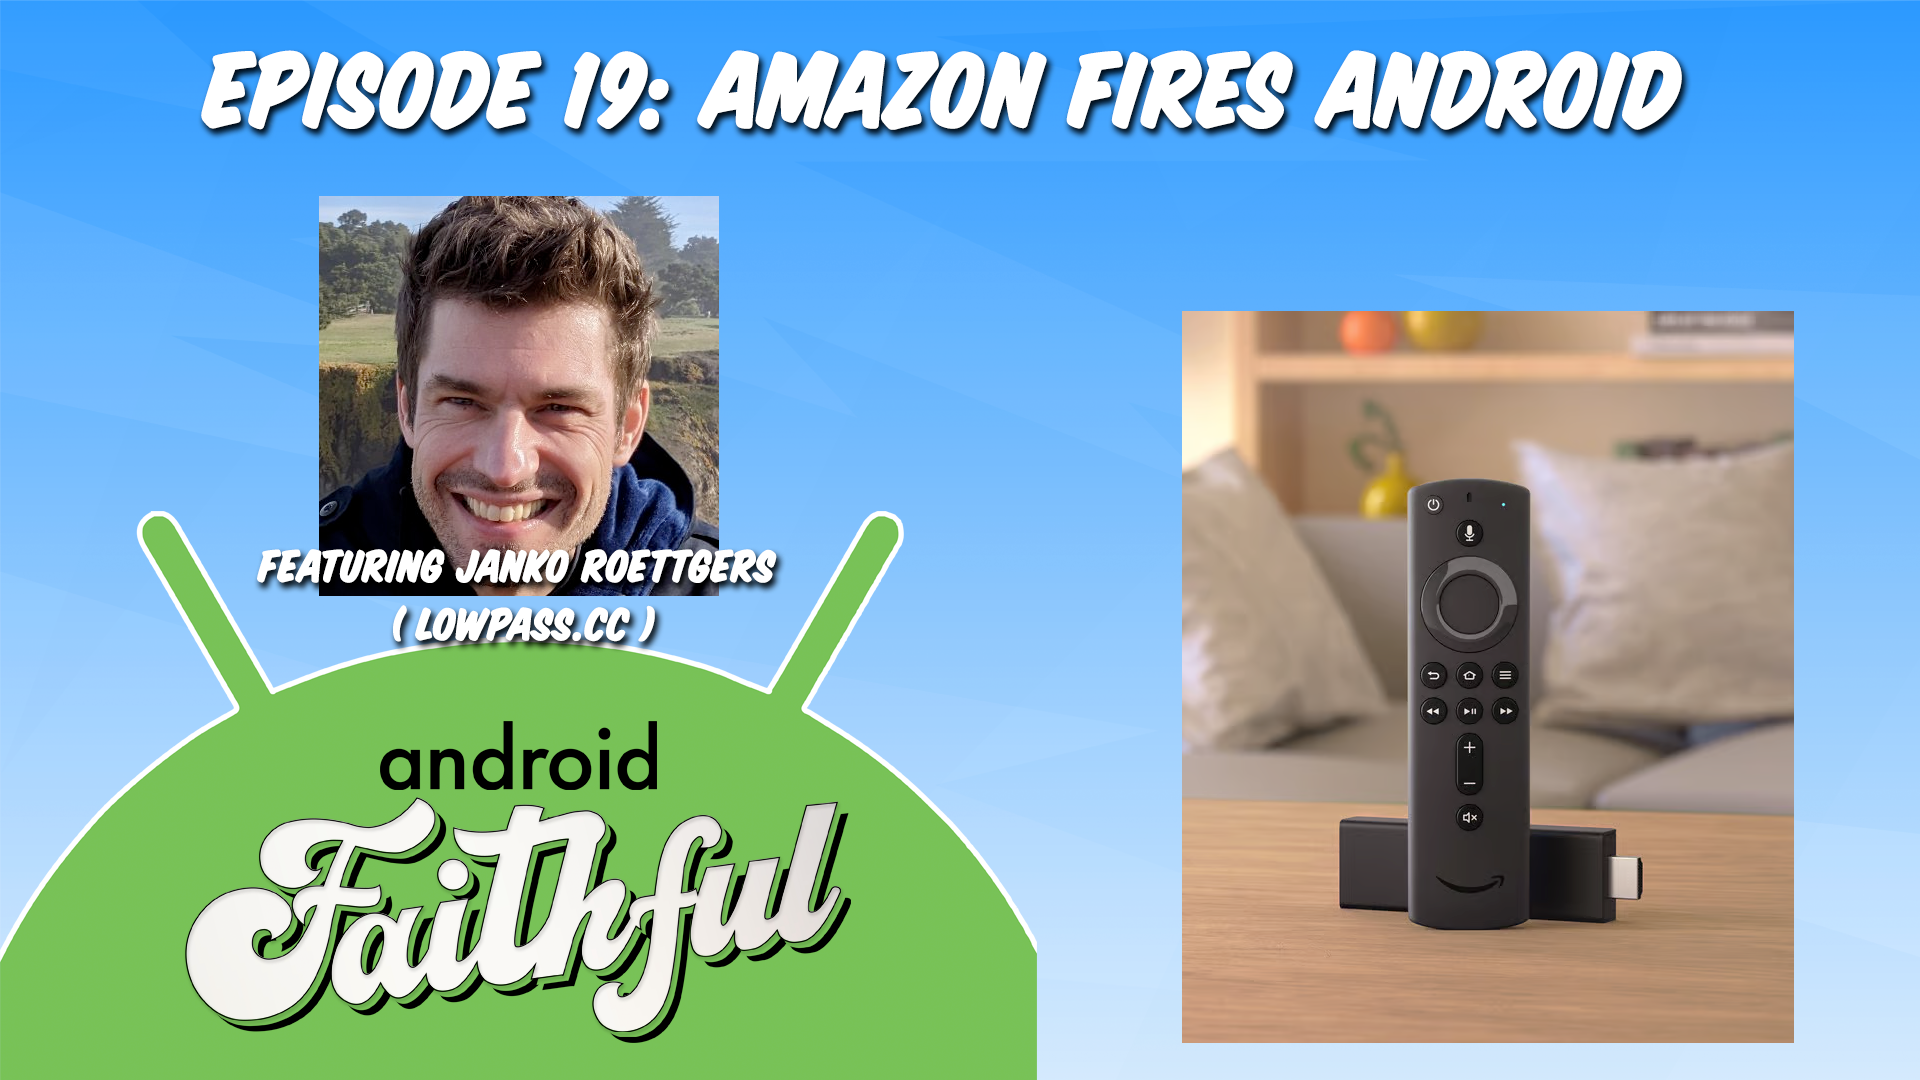 Amazon Fires Android - Android Faithful Episode #19